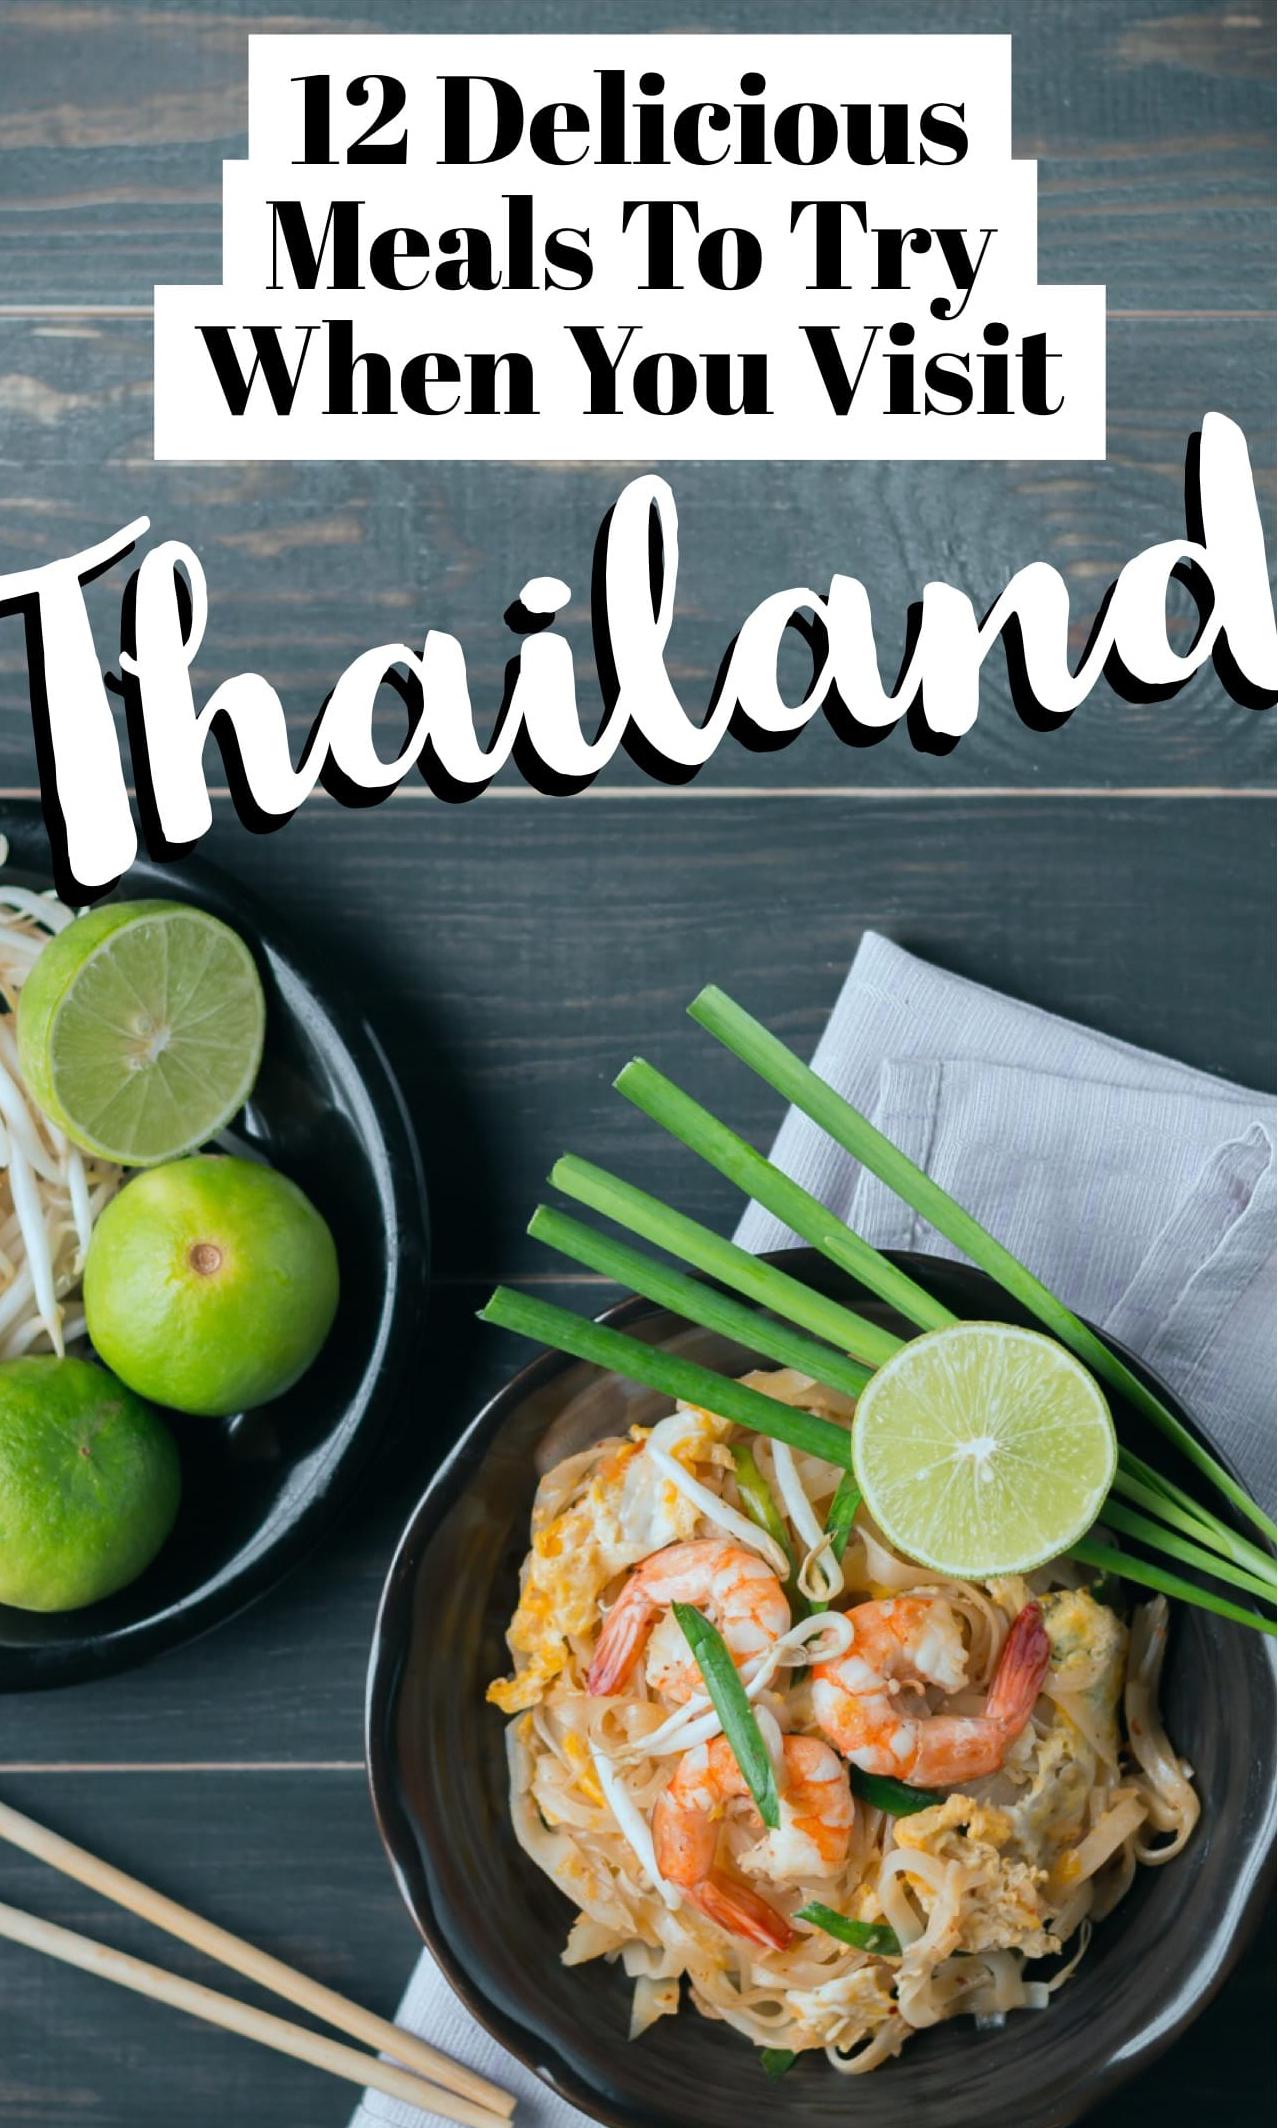 Eat in Khao Sok village - best tips and information of what to look out for